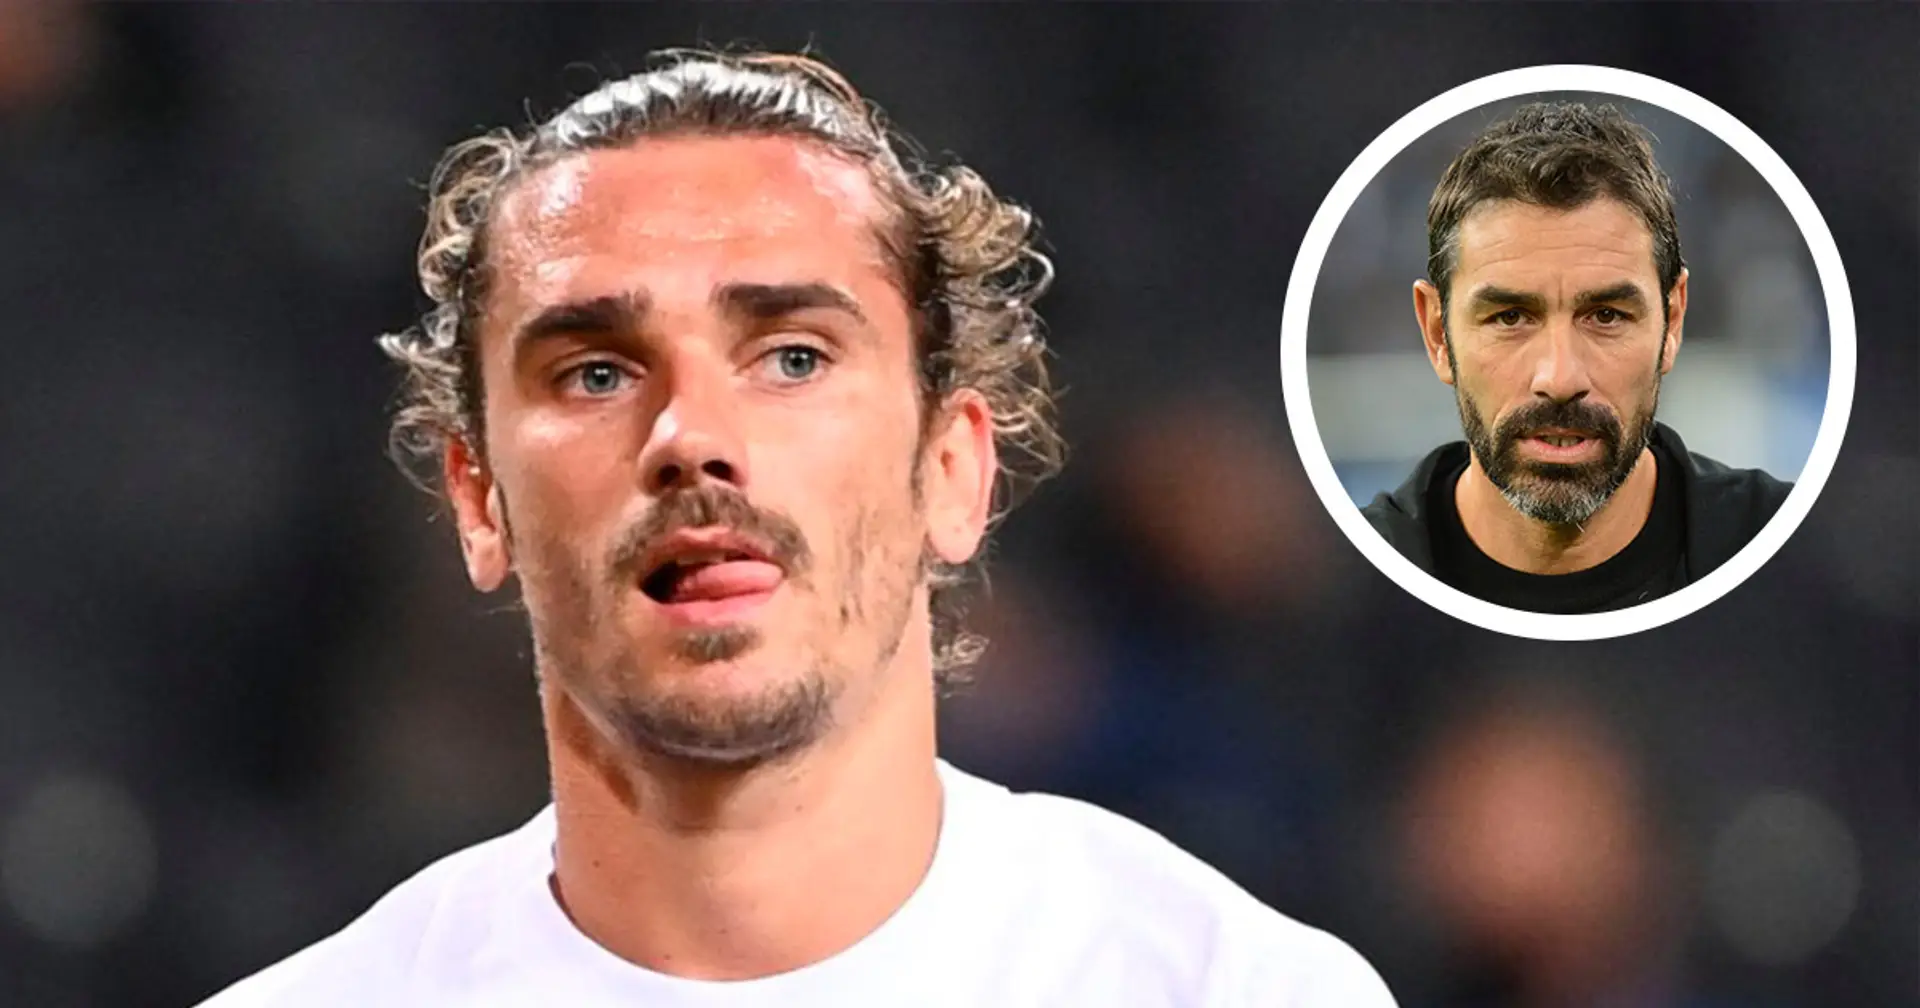 'His season at Barca left a mark': Ex-France great Robert Pires claims Blaugrana mess Griezmann's class up